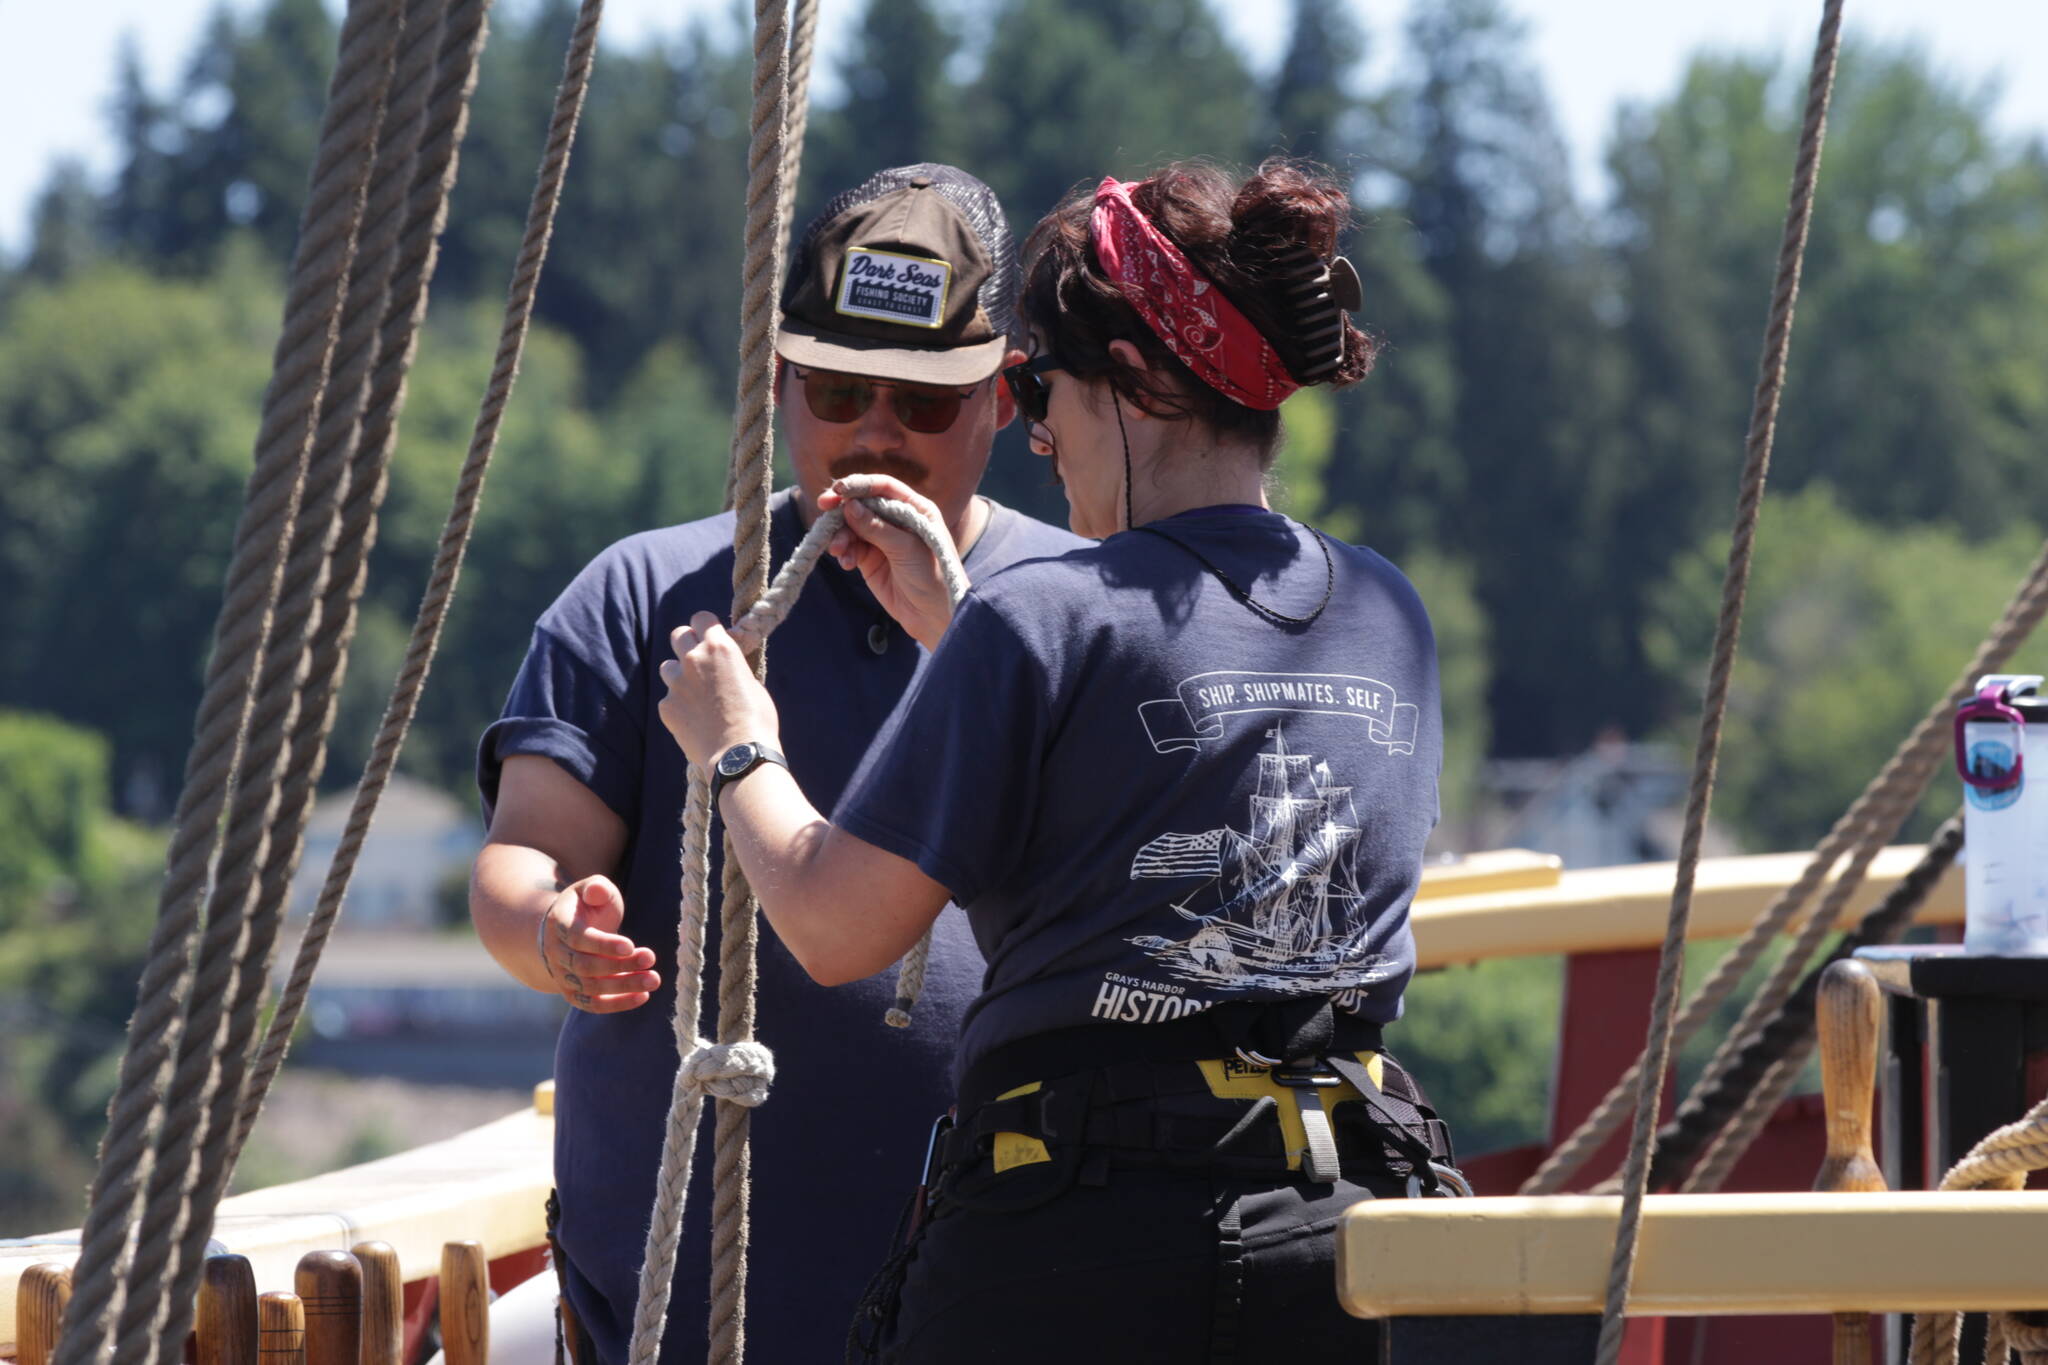 All hands: grad students learn to sail the traditional way